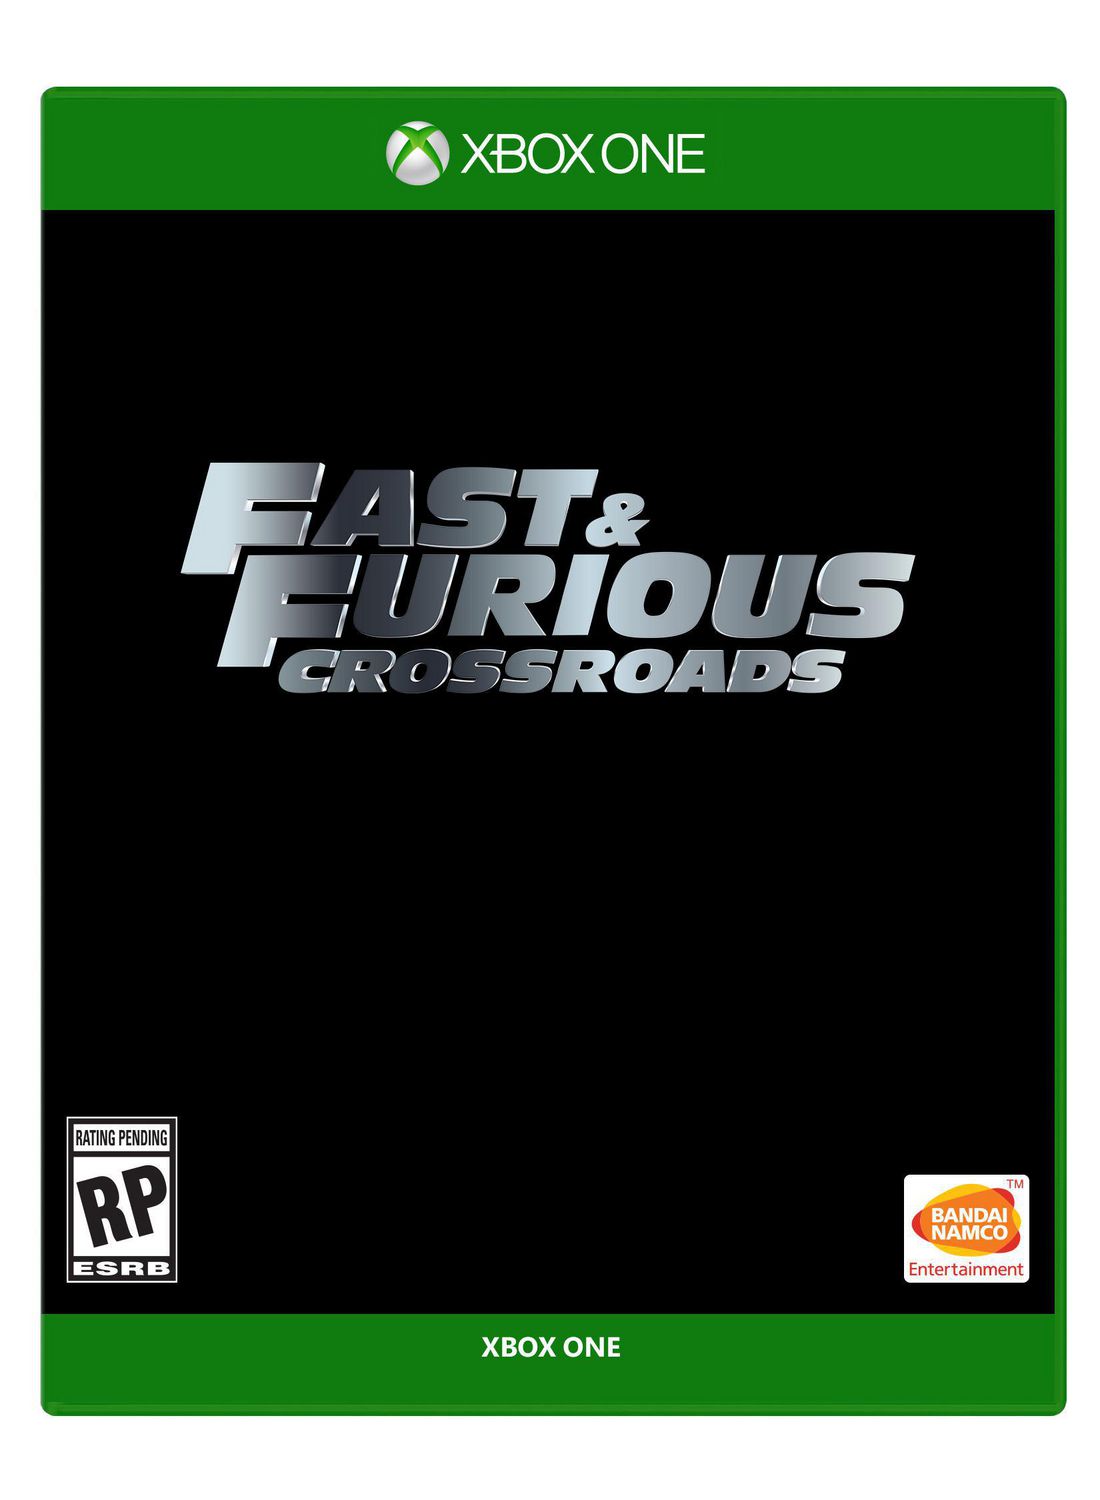 fast and furious xbox one game download